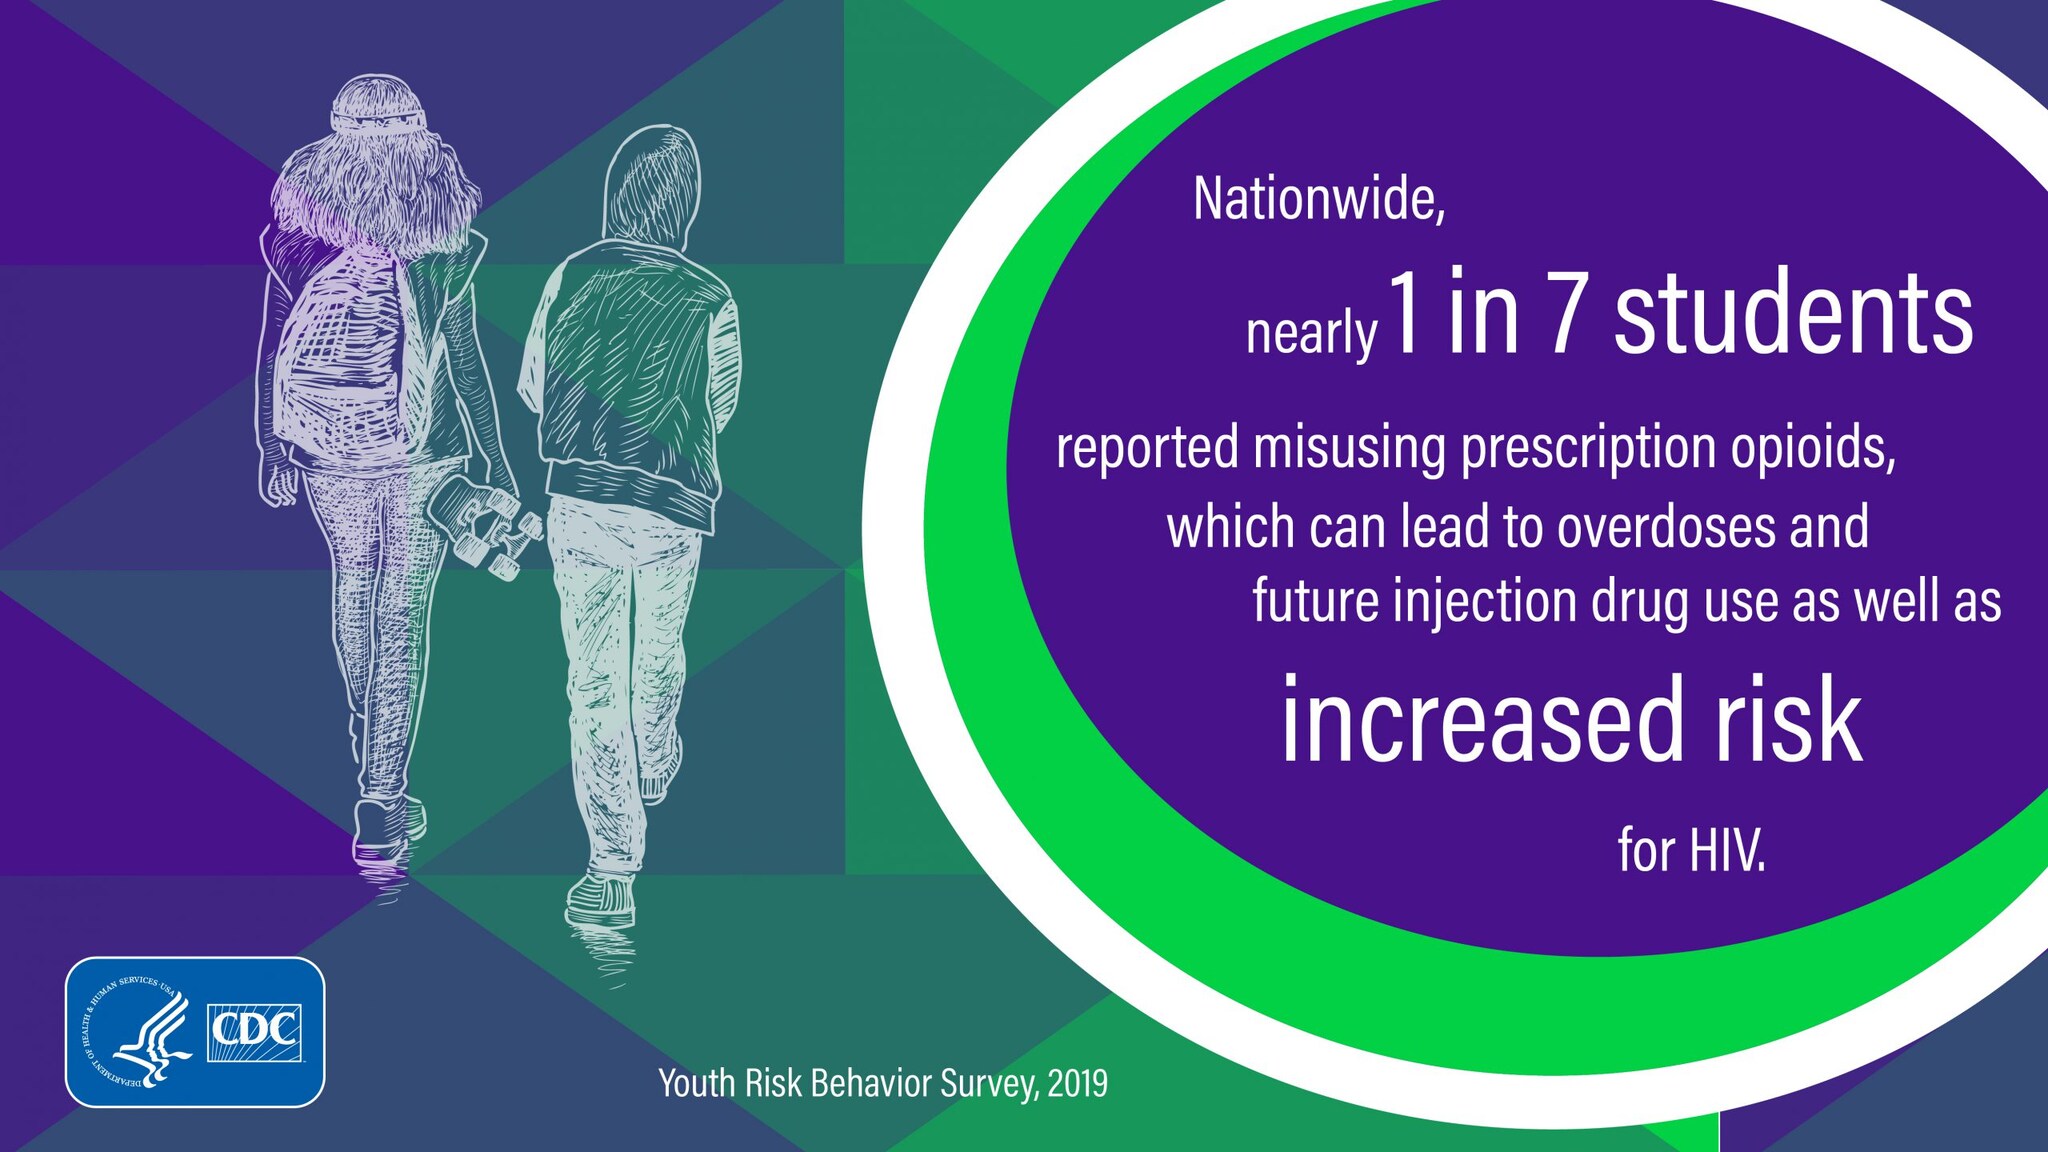 Nationwide, nearly 1 in 7 students reported misusing prescription opiods, which can lead to overdoses and future injection drug use as well as increased risk for HIV.